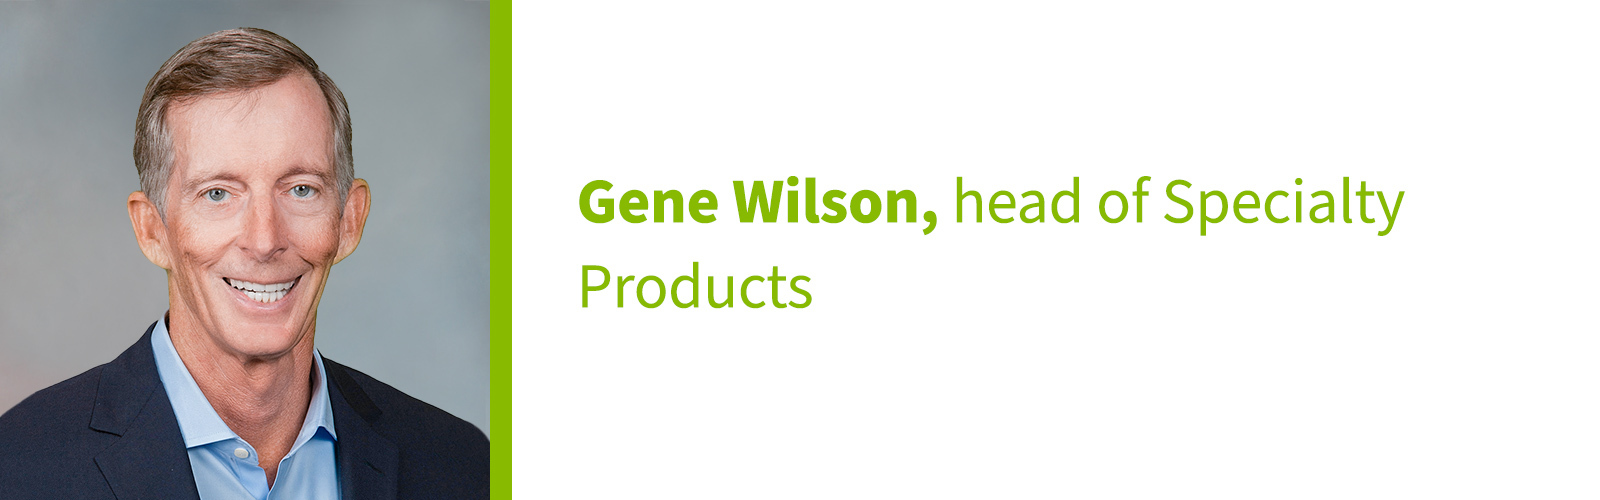 Gene Wilson, head of Specialty Products